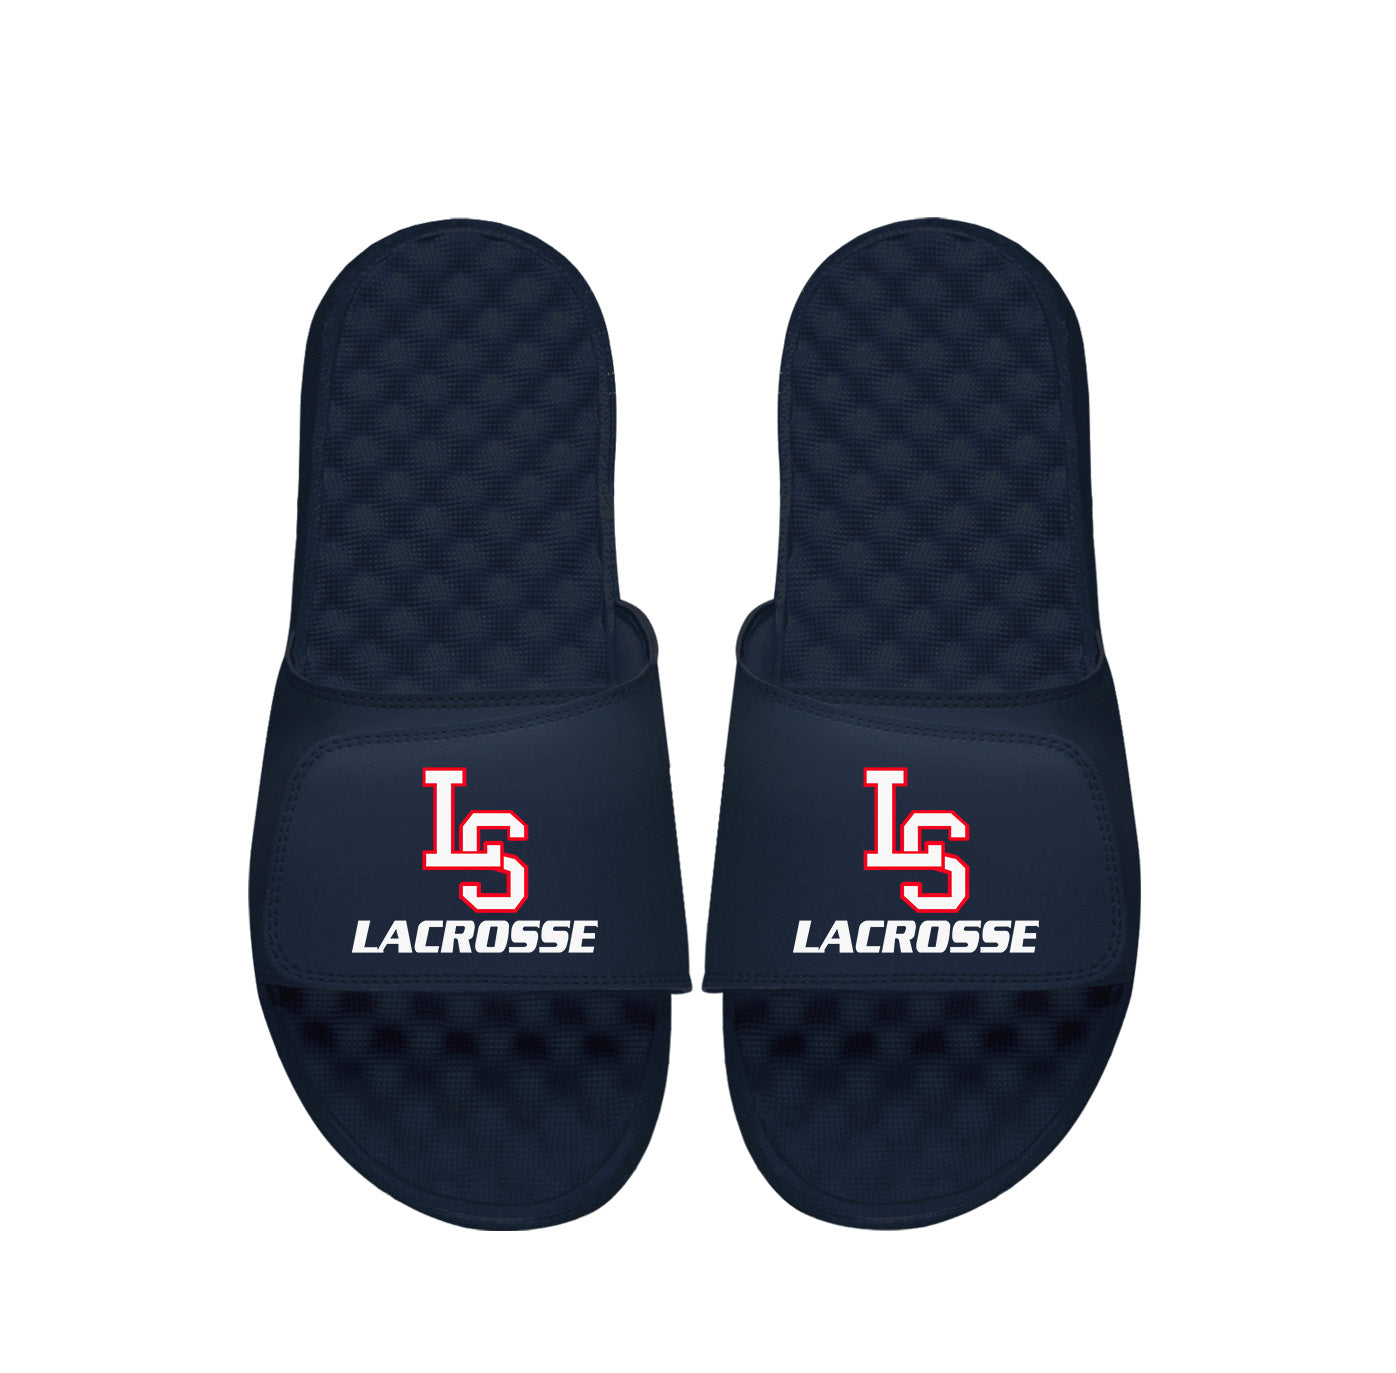 LS Lacrosse Primary PERSONALIZE